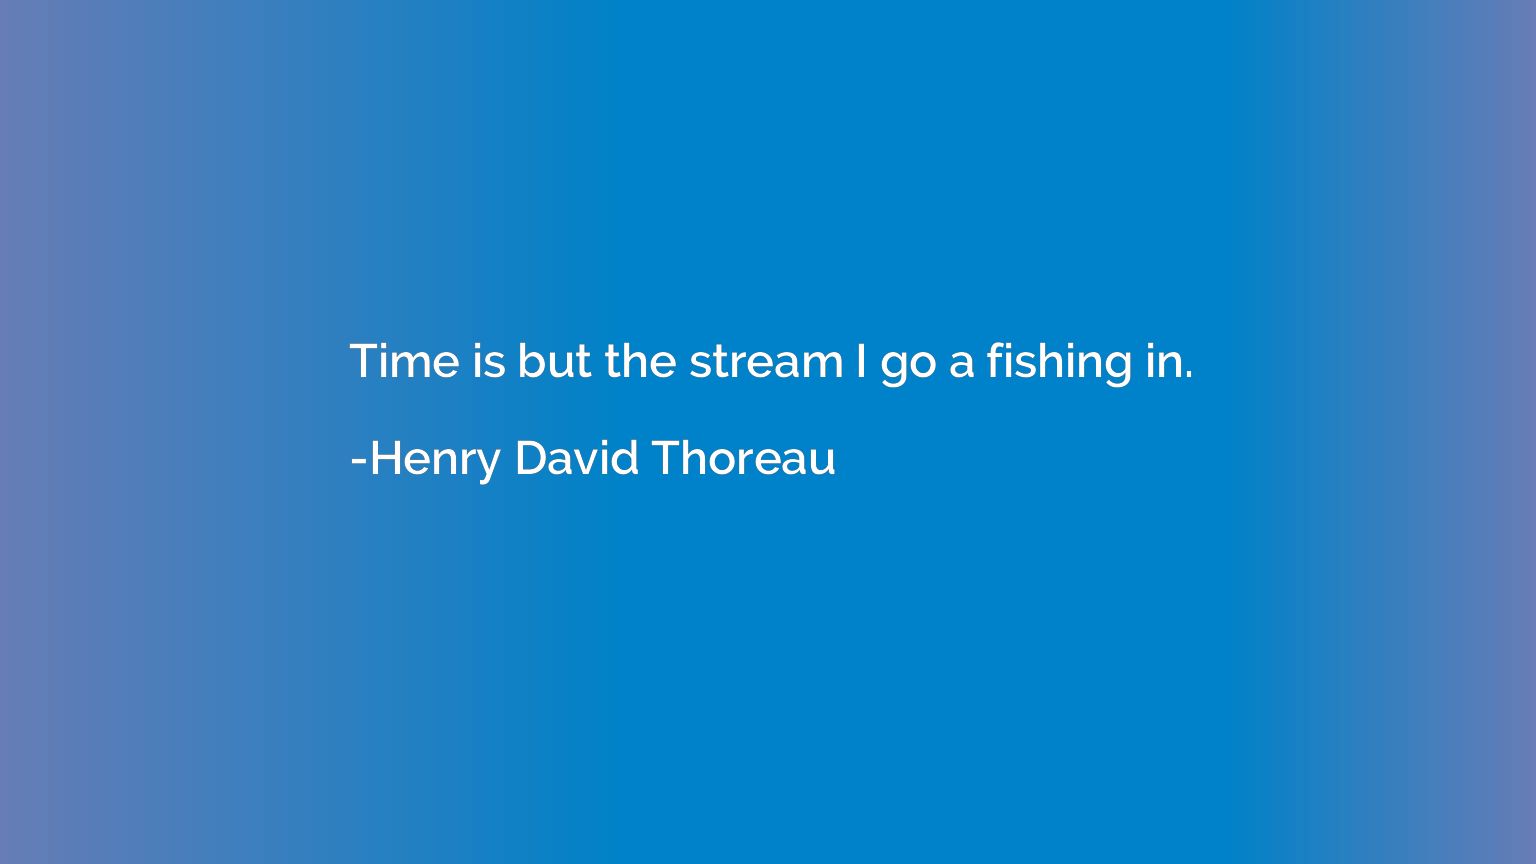 Time is but the stream I go a fishing in.